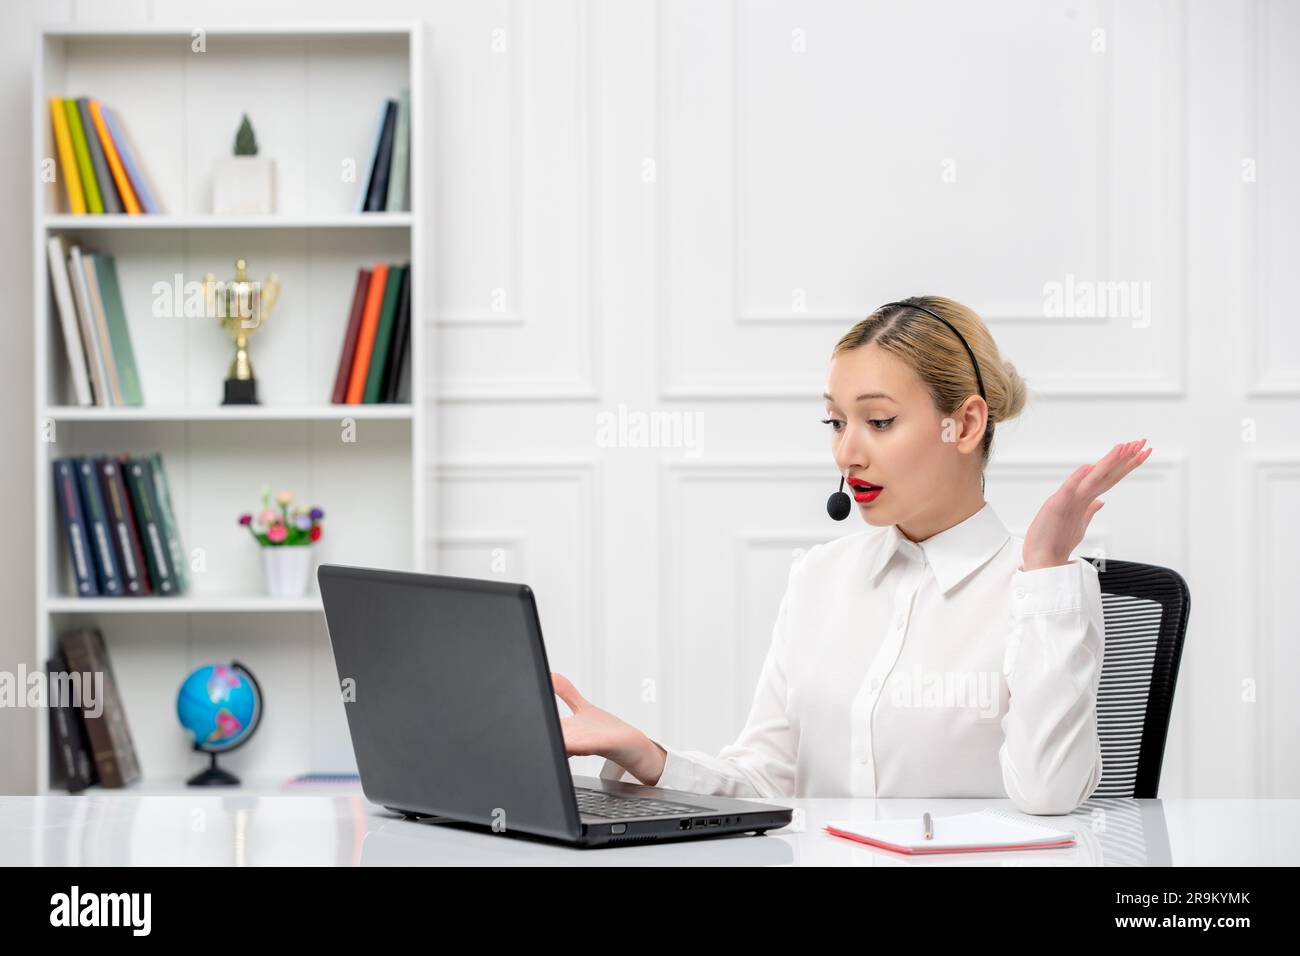 customer service cute blonde girl office shirt with headset and computer waving hands surprisingly Stock Photo